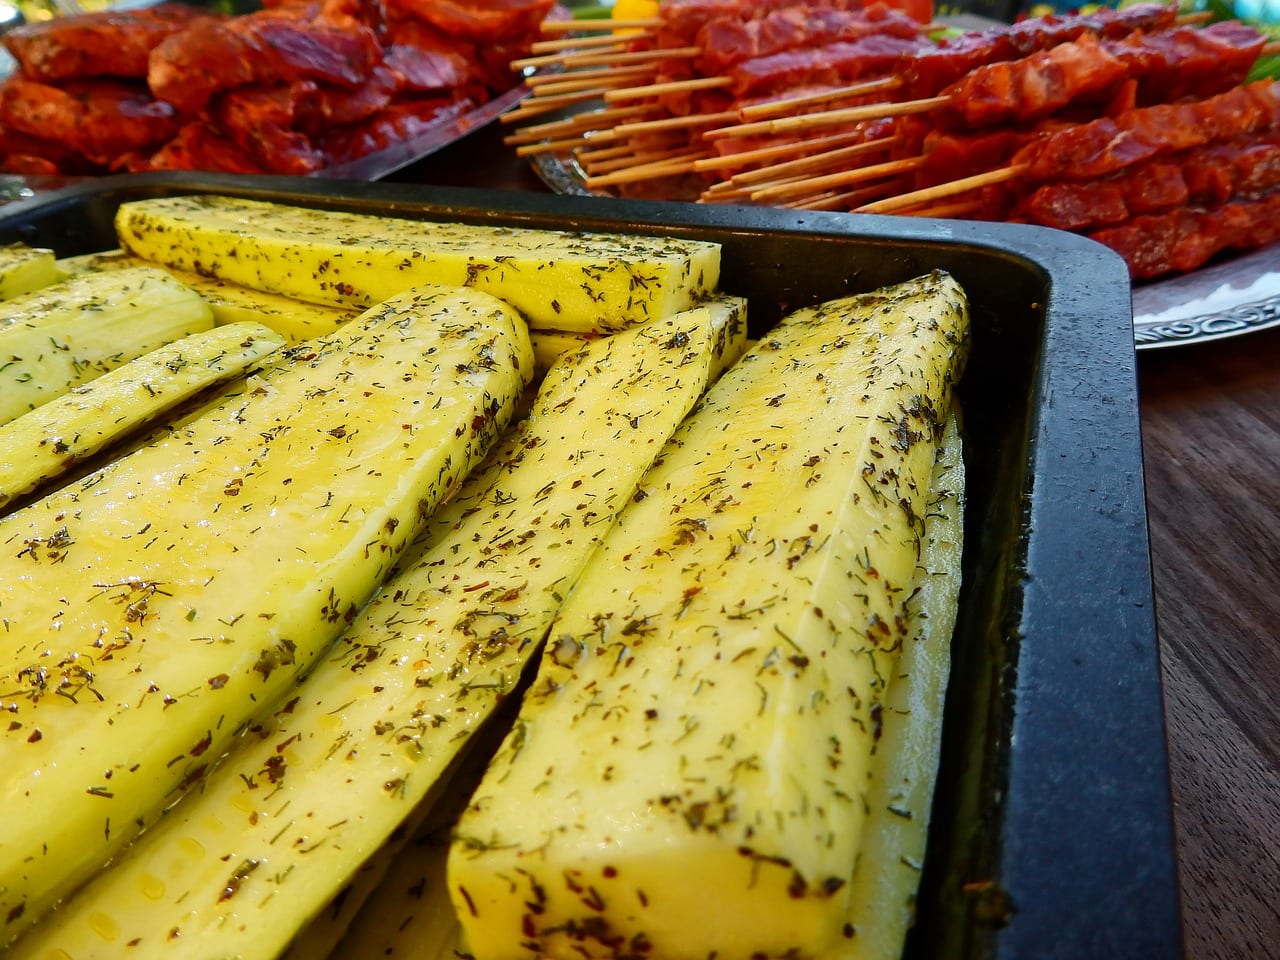 Sliced squash seasoned prepped to grill.